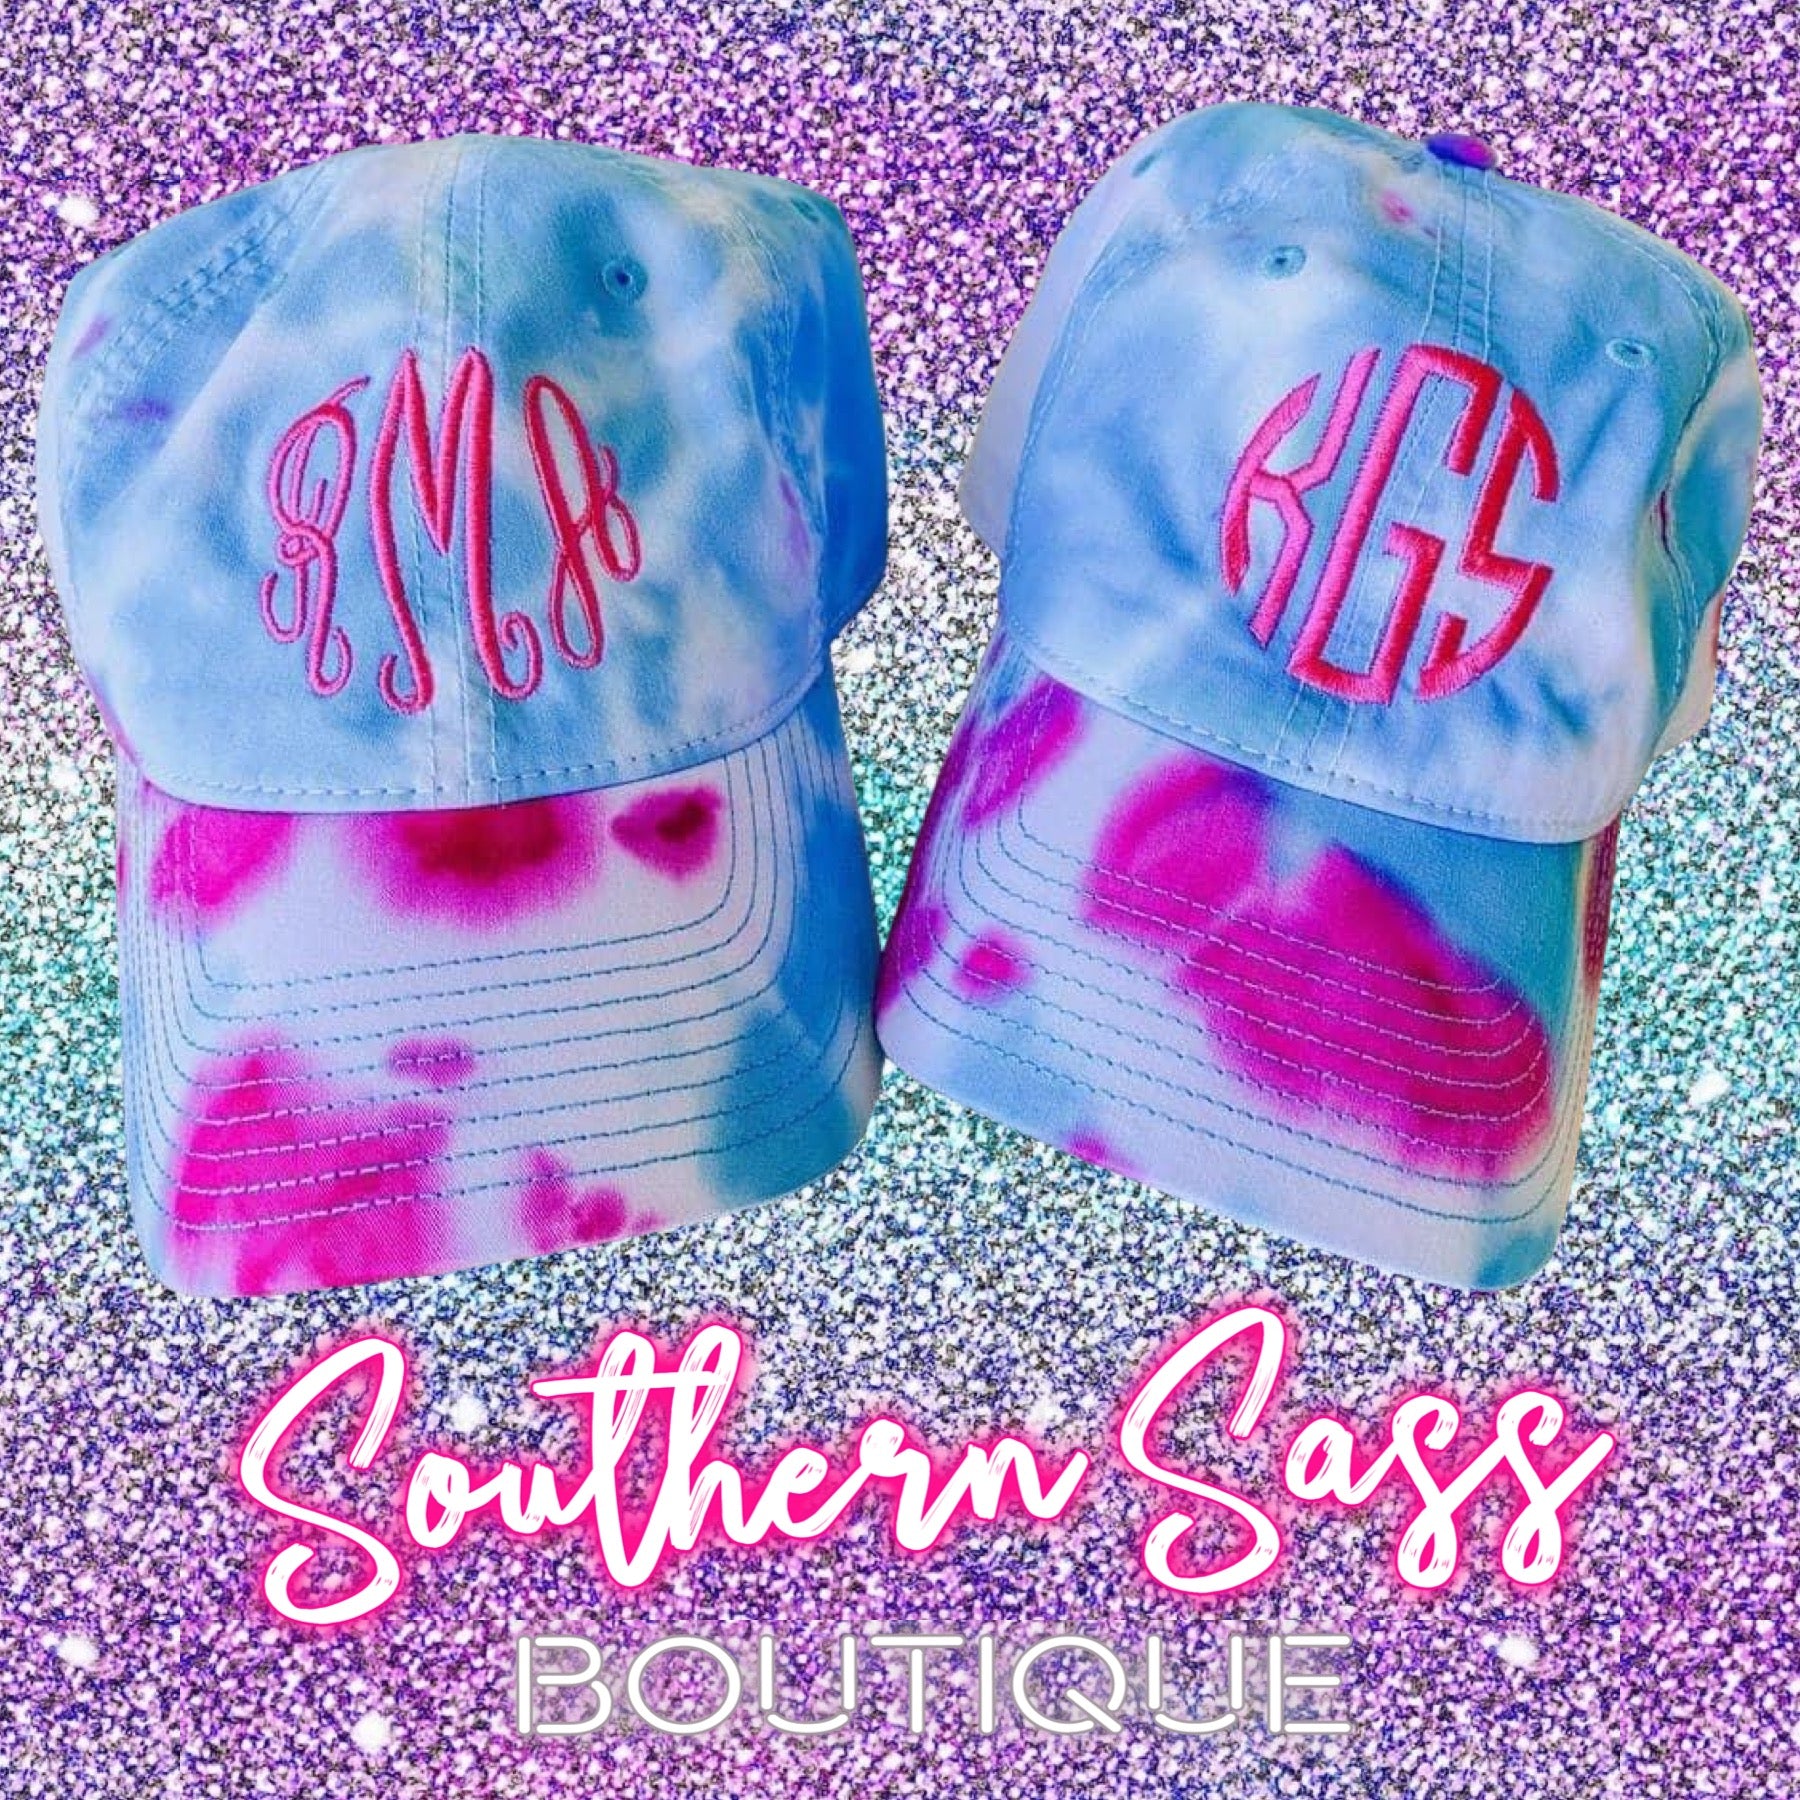 TERRIFIC TIE DYE MONOGRAMMED HAT - EMBROIDERY INCLUDED